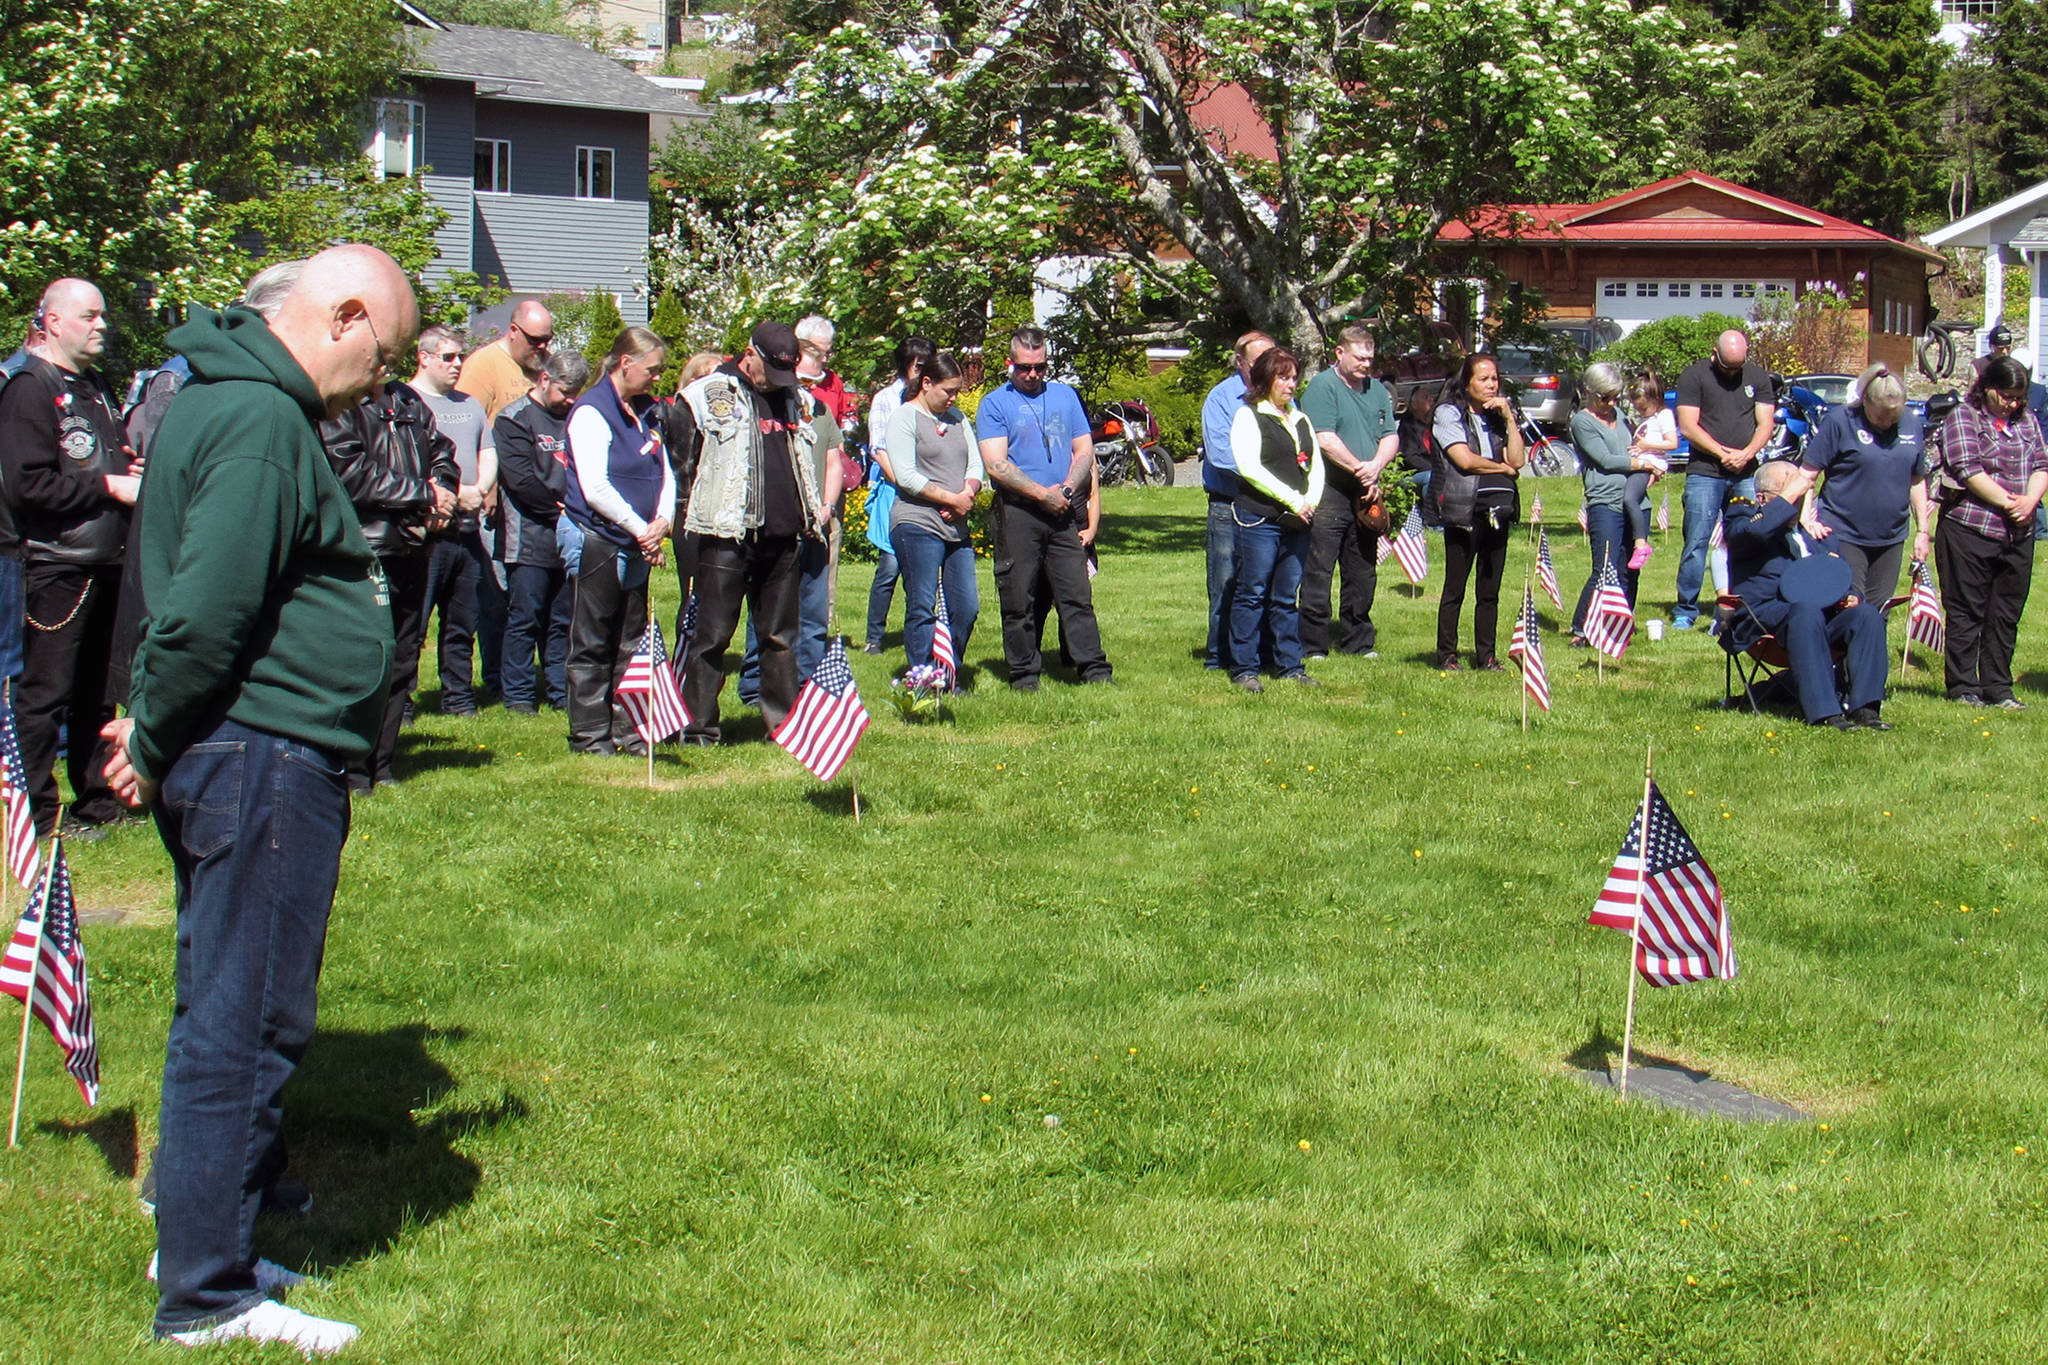 Attendees bow their heads during prayer at a Memorial Day Ceremony held at Evergreen Cemetery, Monday, May 27. (Ben Hohenstatt | Juneau Empire)